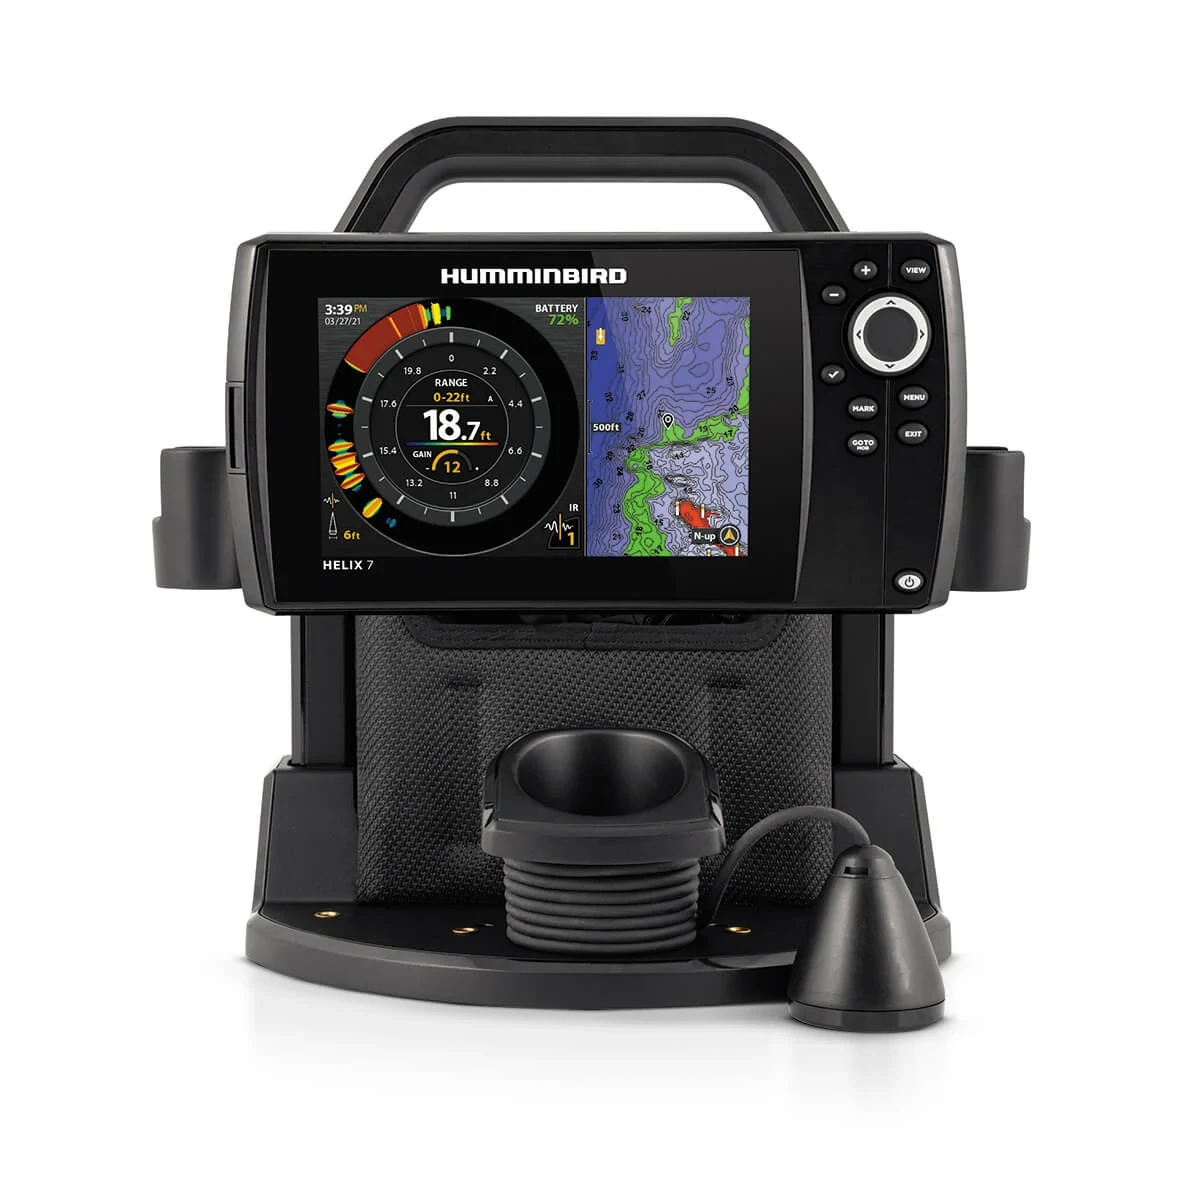 ICE HELIX 7 CHIRP GPS G4 All Season shown with a split screen displaying both flasher and GPS views